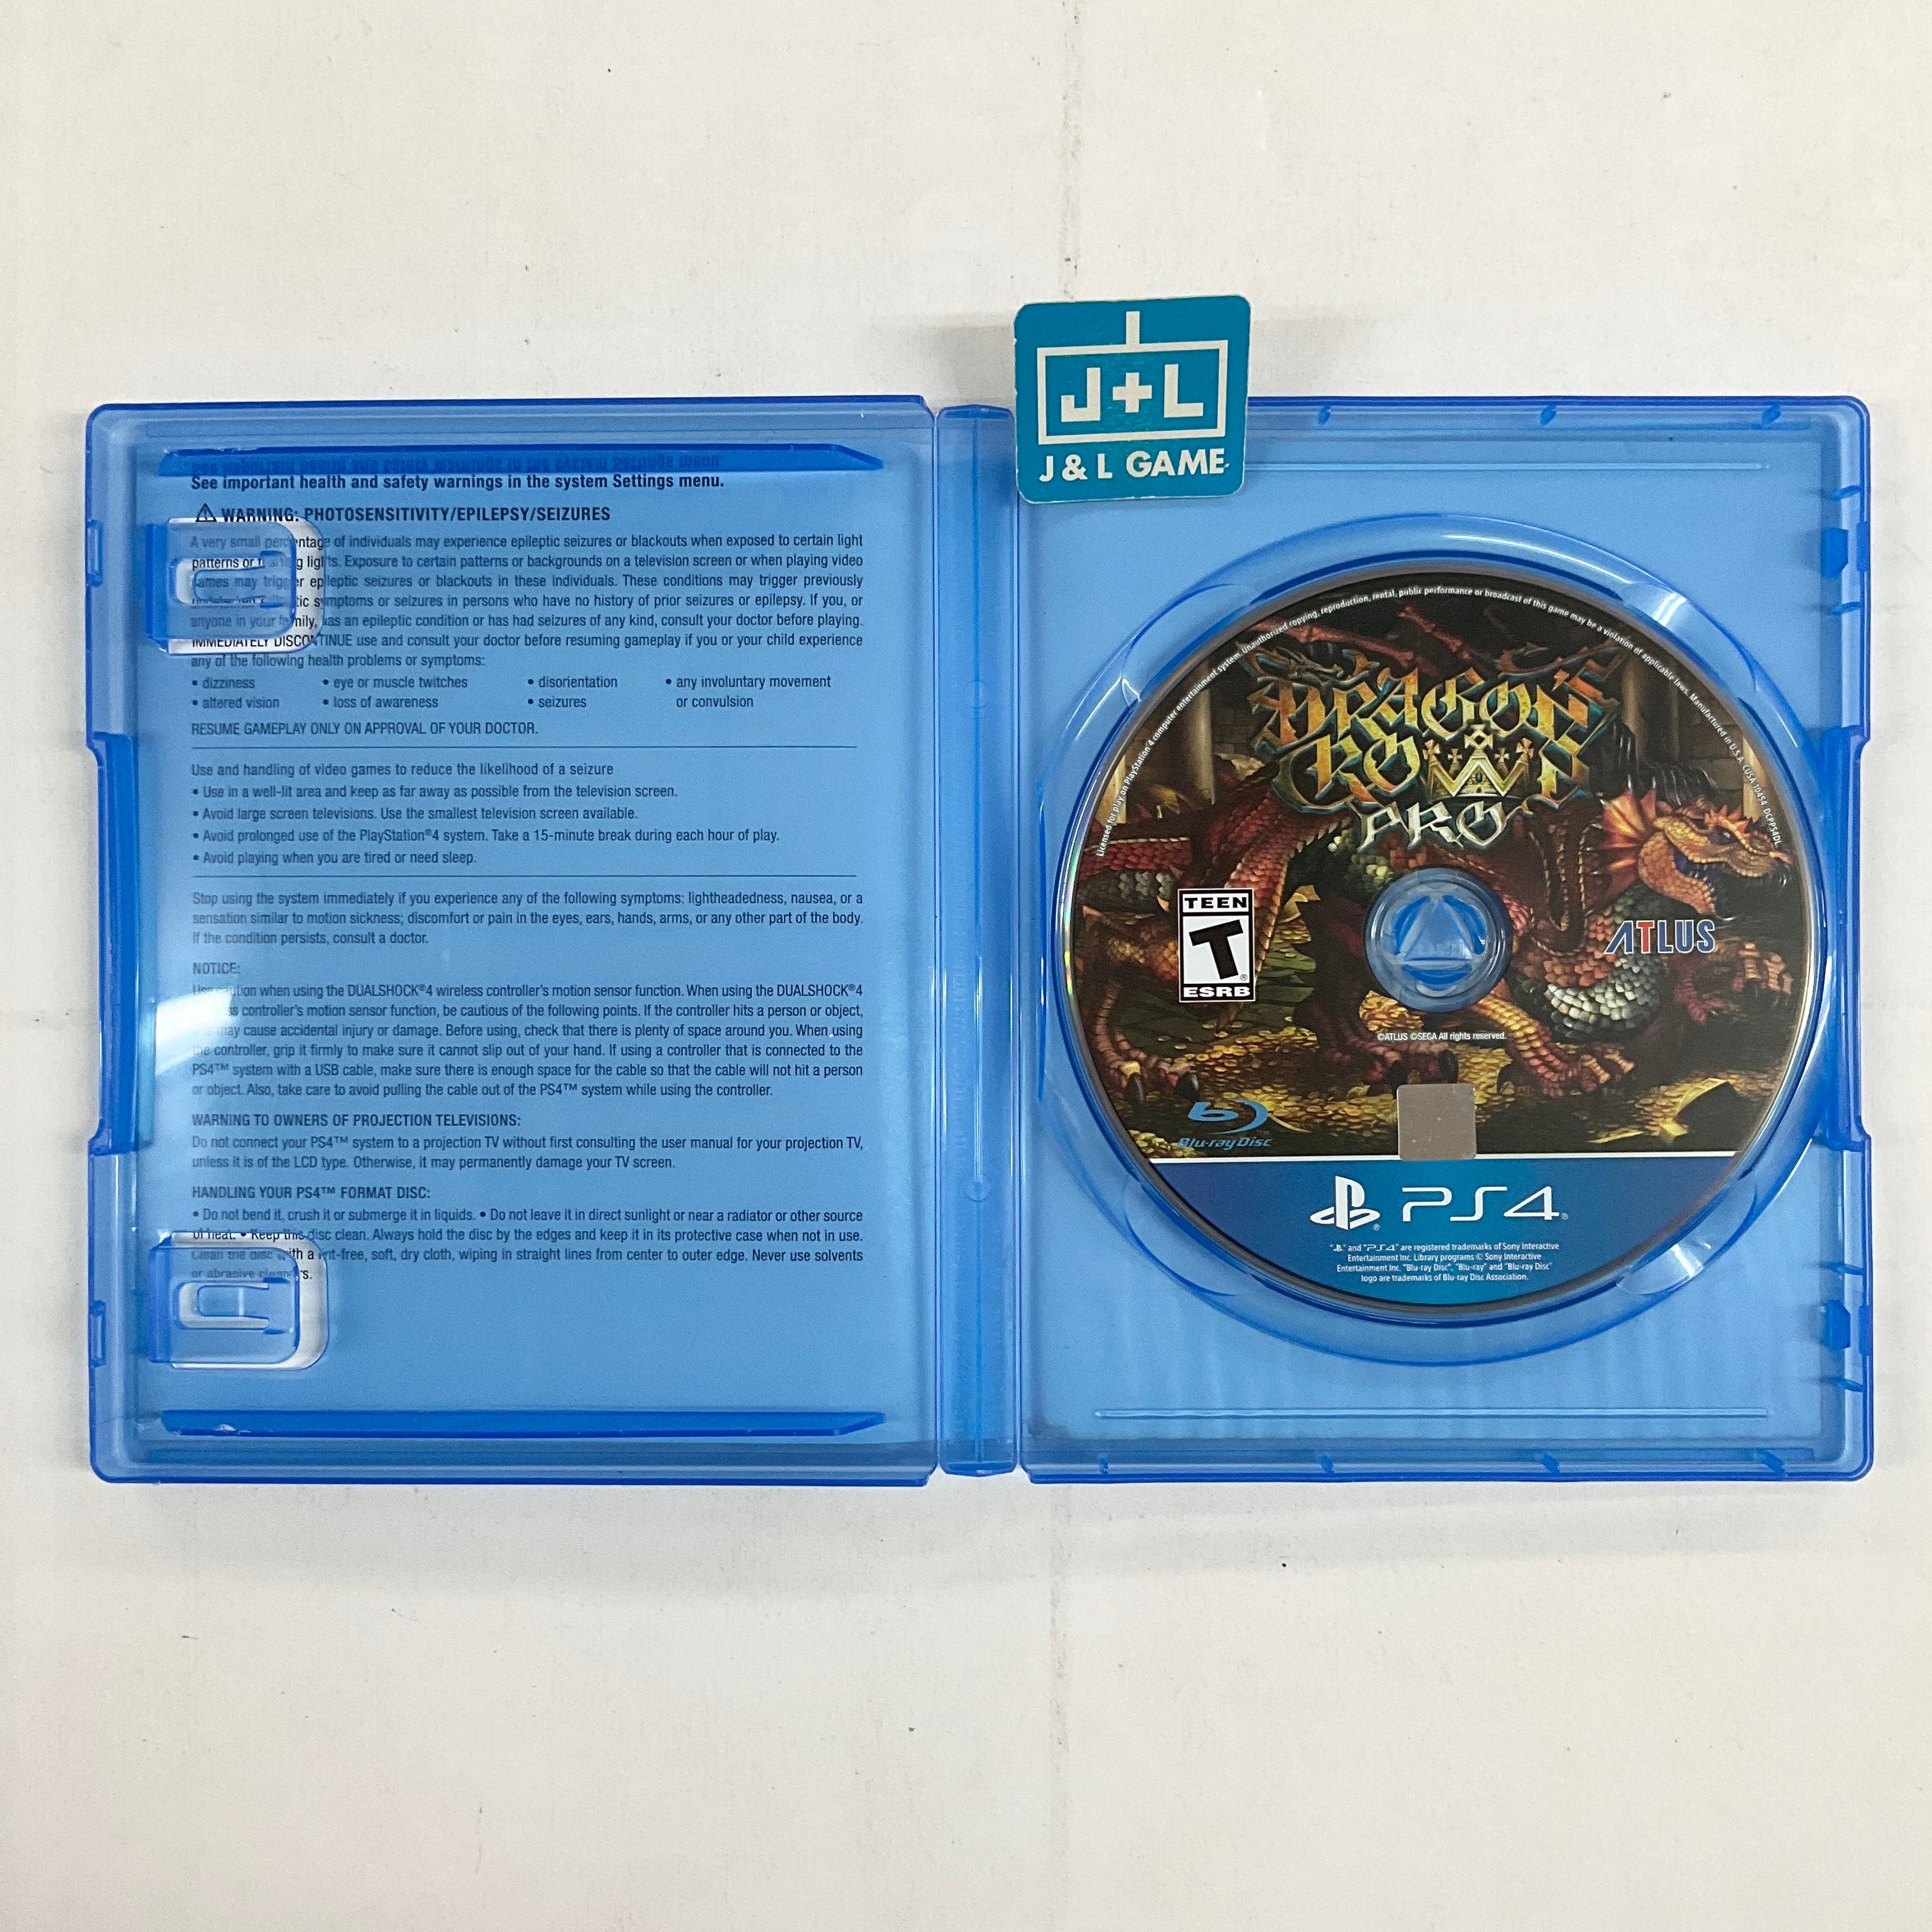 Dragon's Crown Pro - (PS4) PlayStation 4 [Pre-Owned] Video Games Atlus   